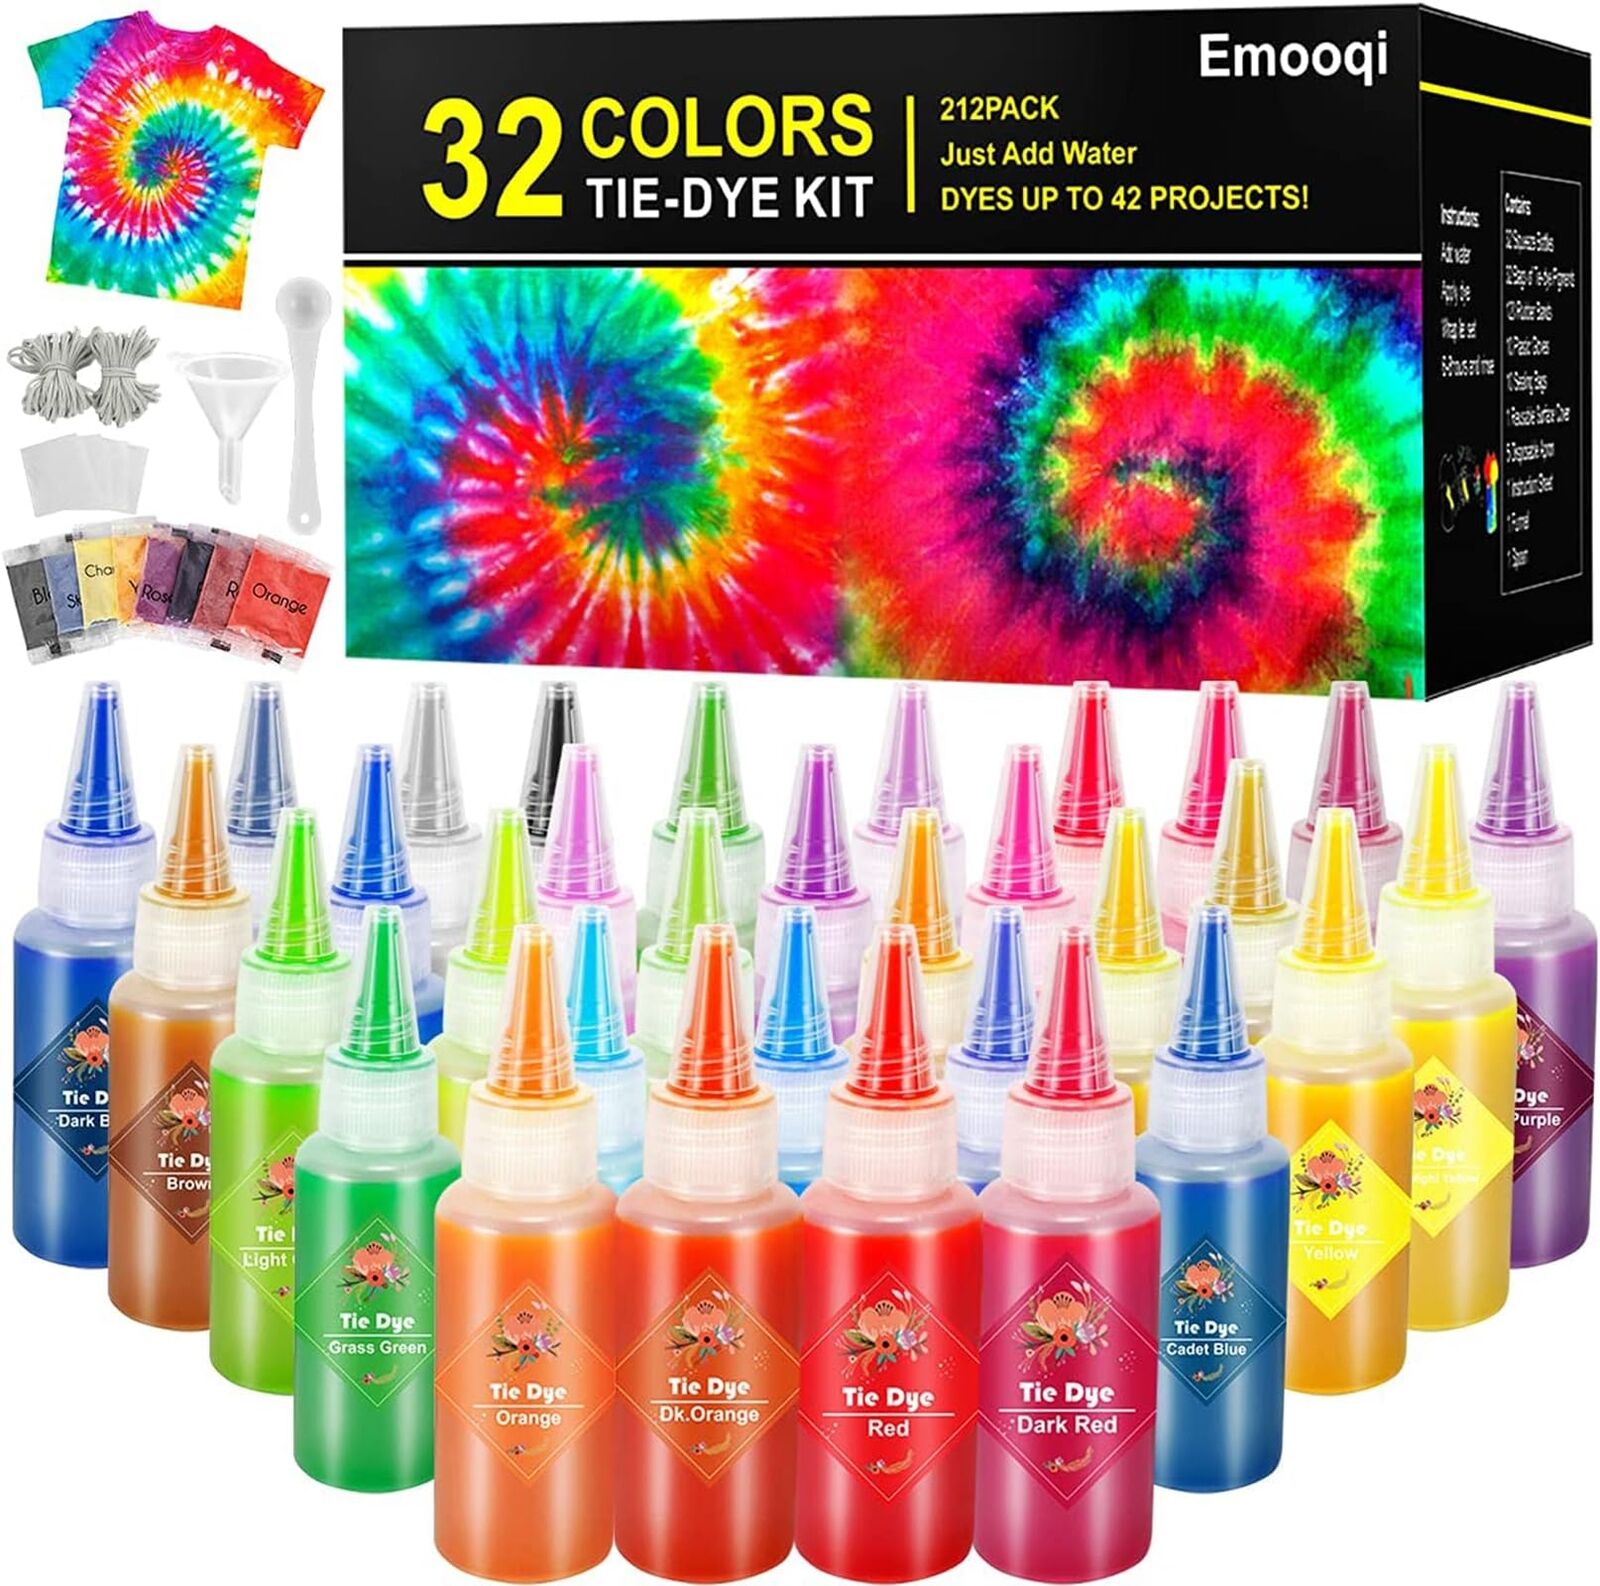 DIY Tie Dye Kits 32 Colours All-in-1 Tie Dye Set Craft Arts Fabric Textile Party